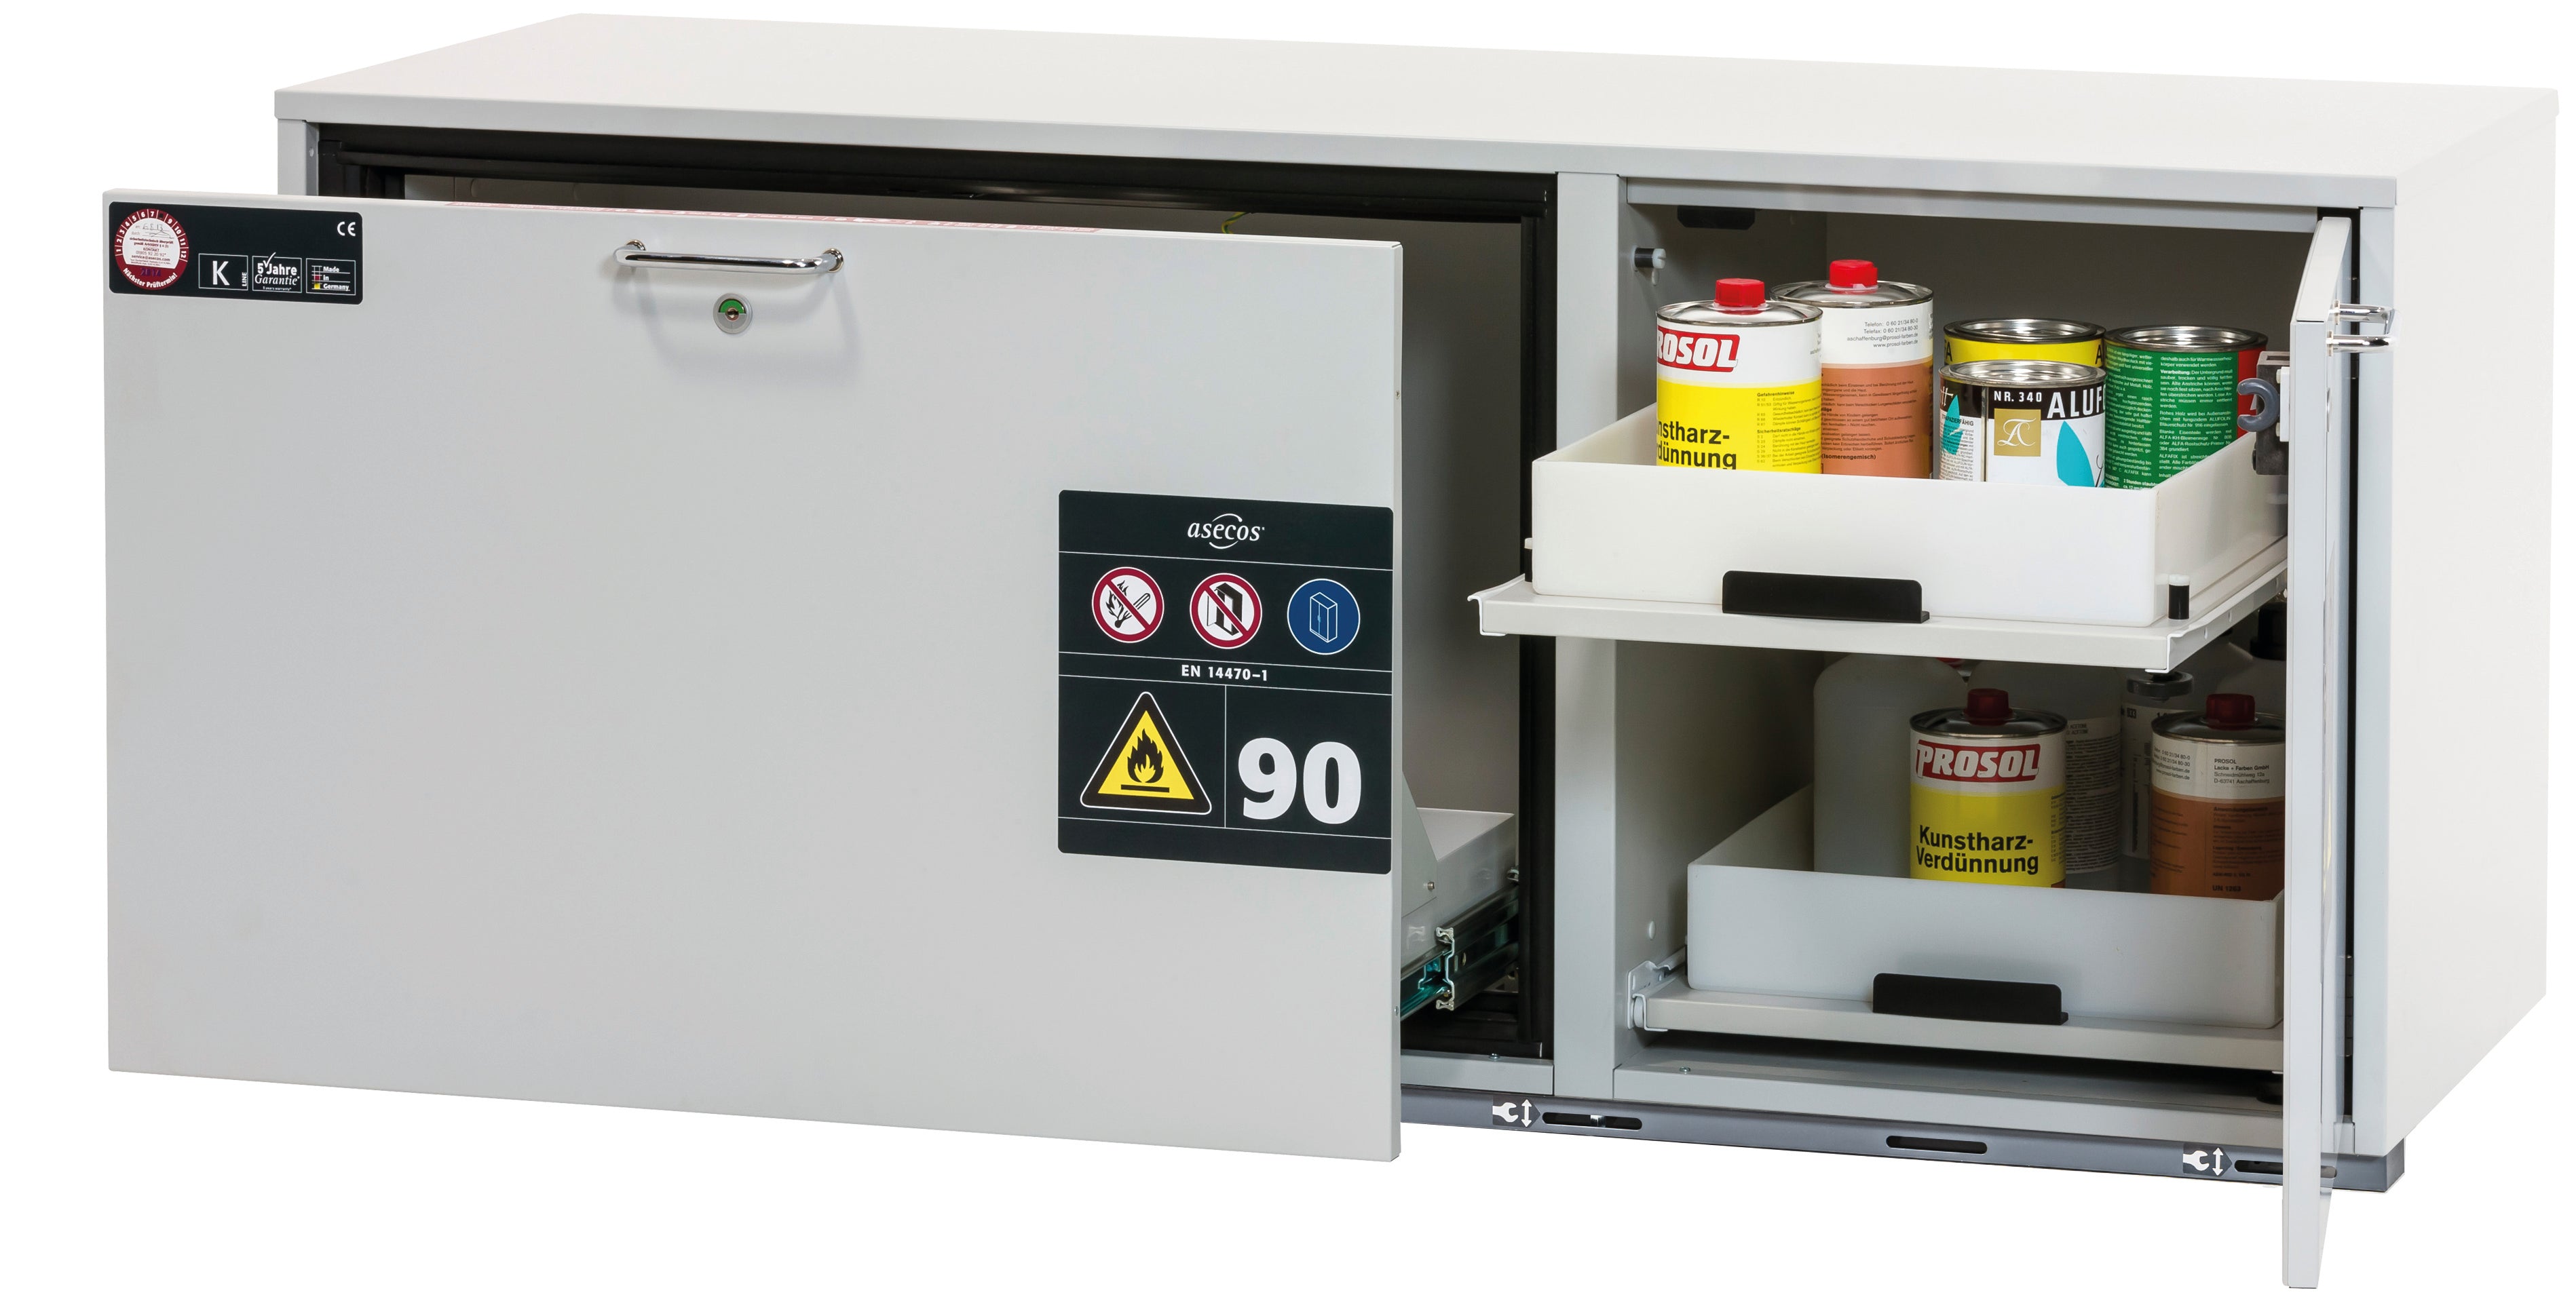 Type 90 combination safety cabinet K-UB-90 model K90.060.140.050.UB.ST in light gray RAL 7035 with 1x drawer tray STAWA-R (sheet steel)